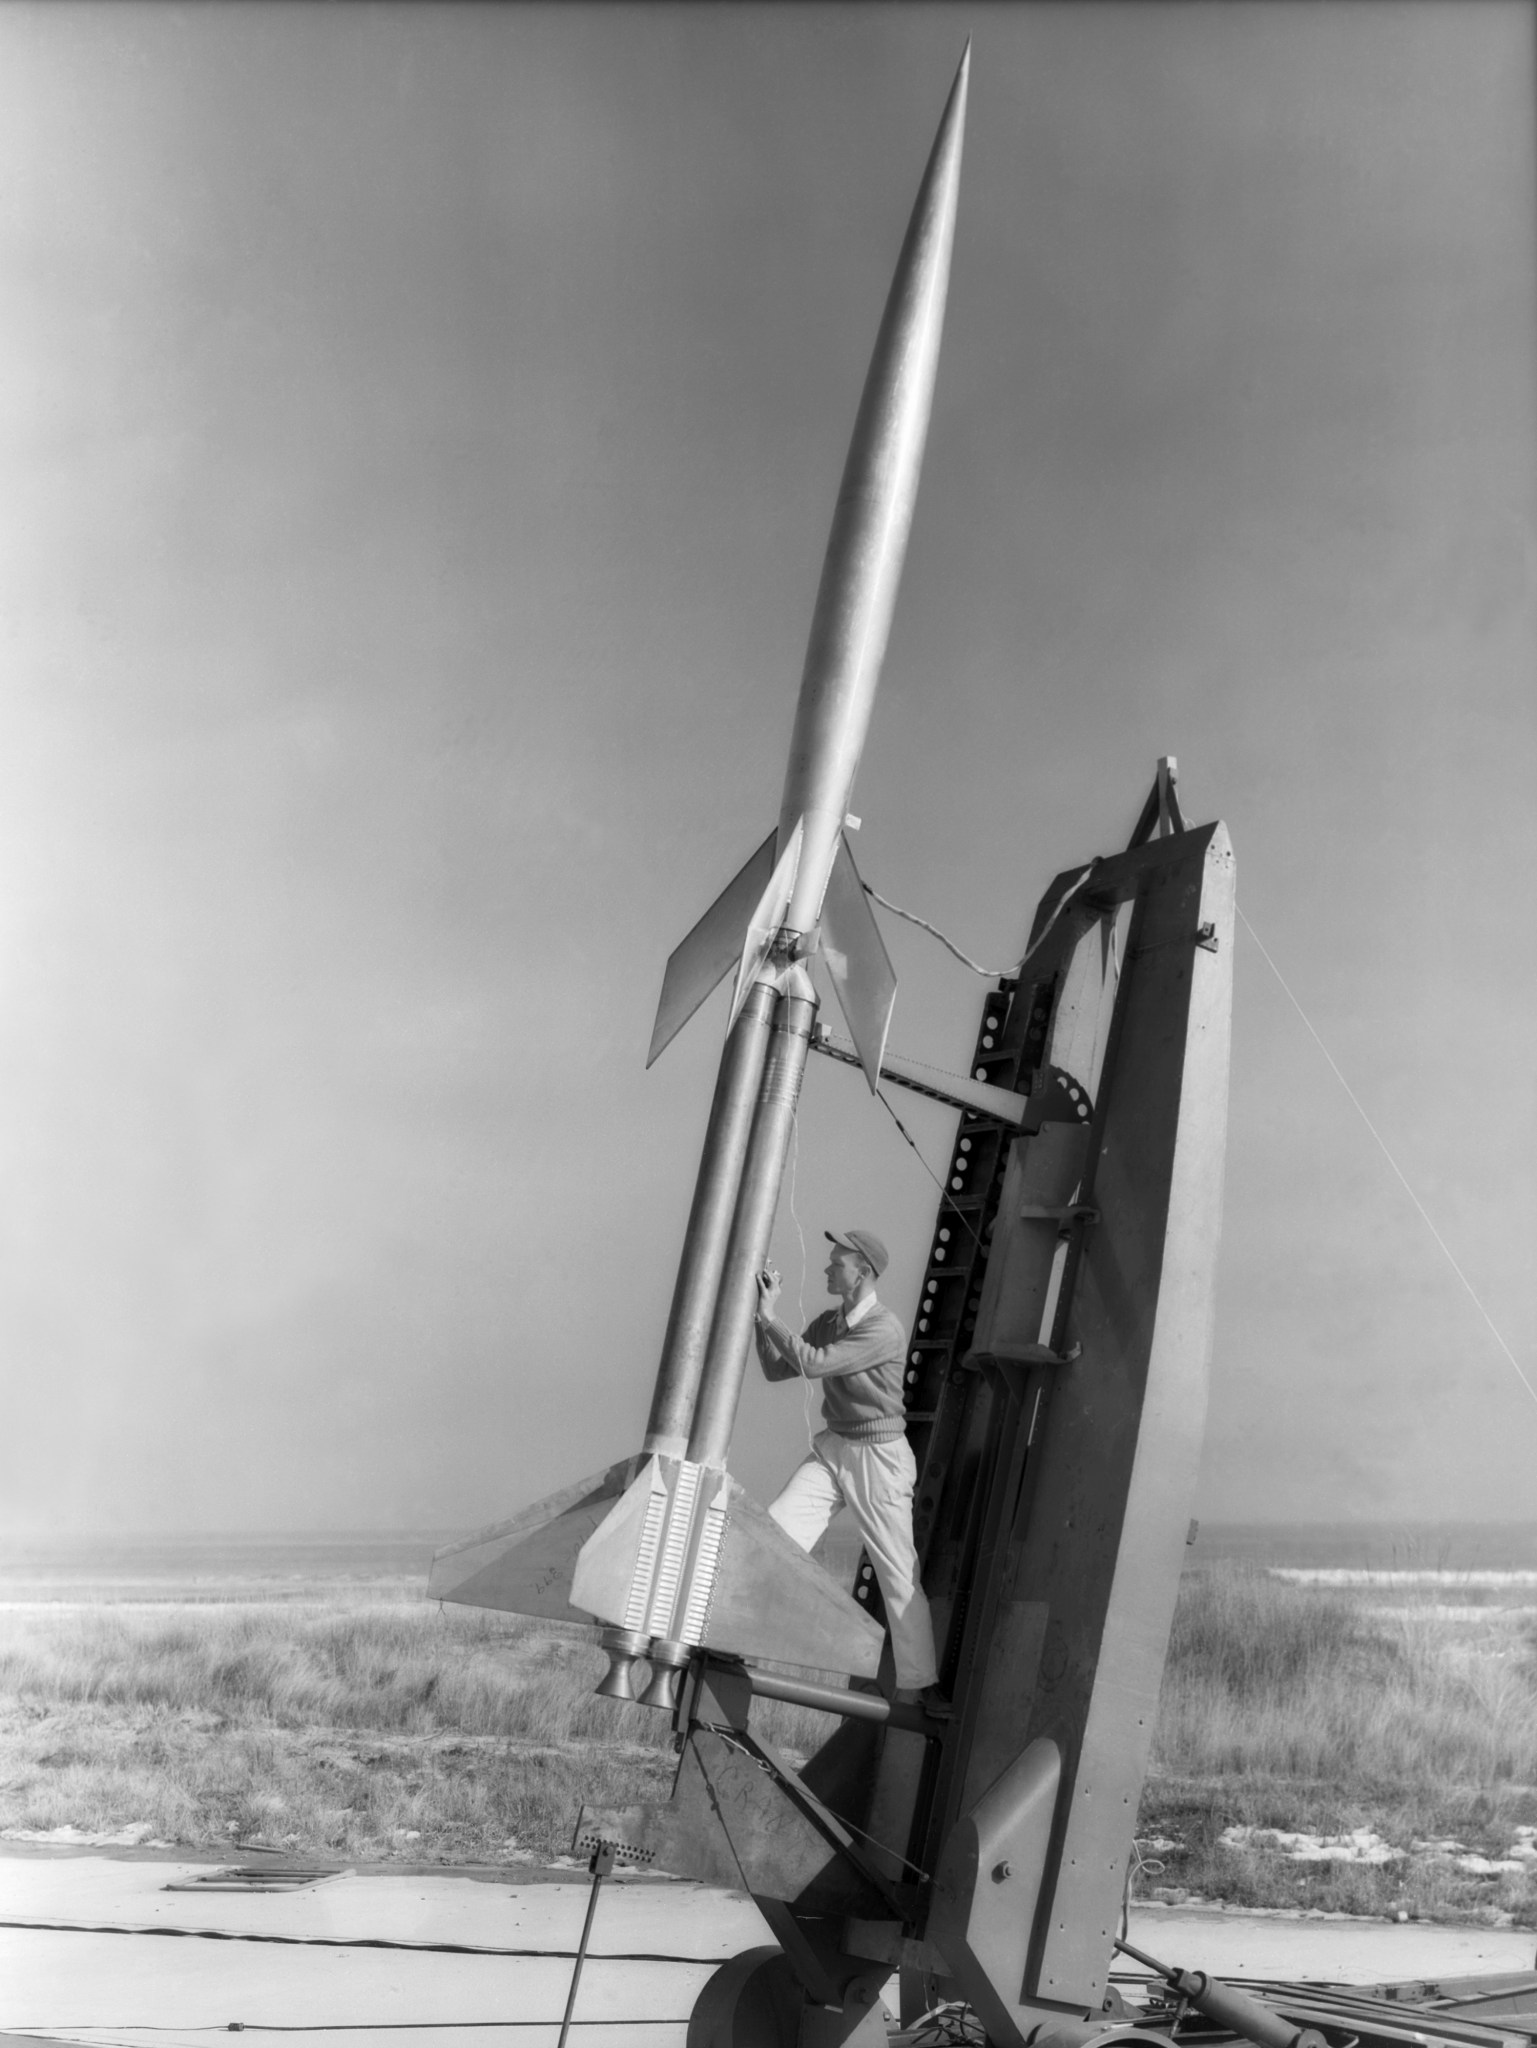 RM-10 Research Model on Launcher Wallops Island NASA Langley. Technician Durwood Dereng measures elevation of double Deacon booster prior to launch of RM-10 research model at Wallops, February 6, 1951. Photograph published in A New Dimension; Wallops Island Flight